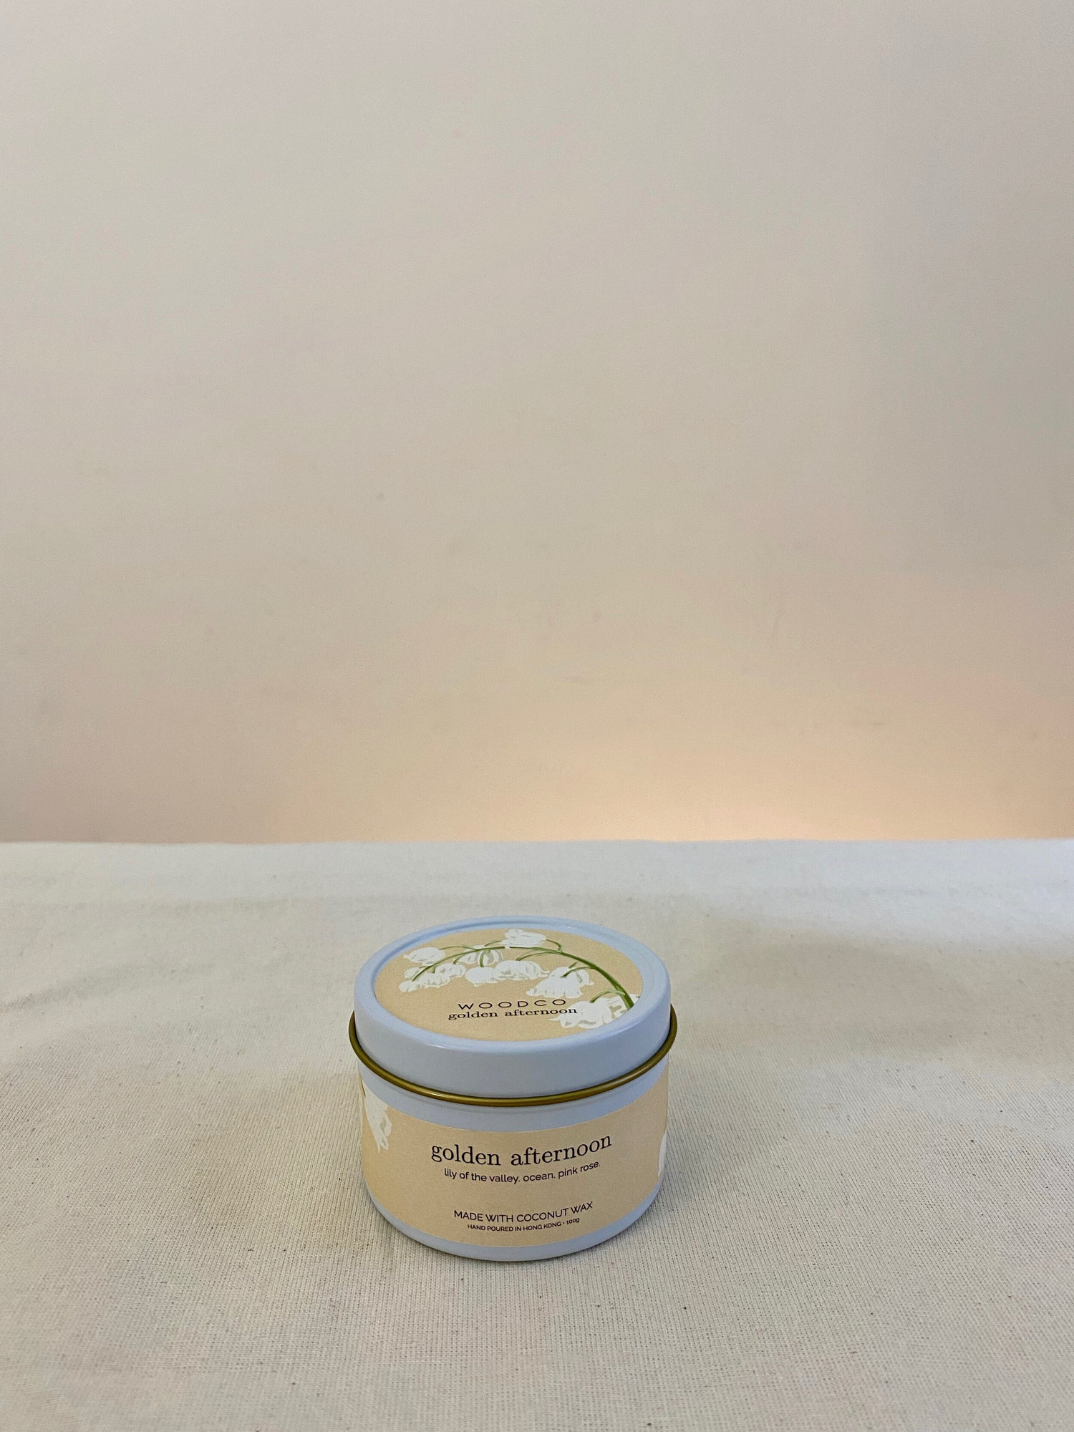 WOODCO candle handcrafted in small batches coconut wax shop sustainable brands ethical eco-friendly wooden wick for a clean burn shop small women-owned brands